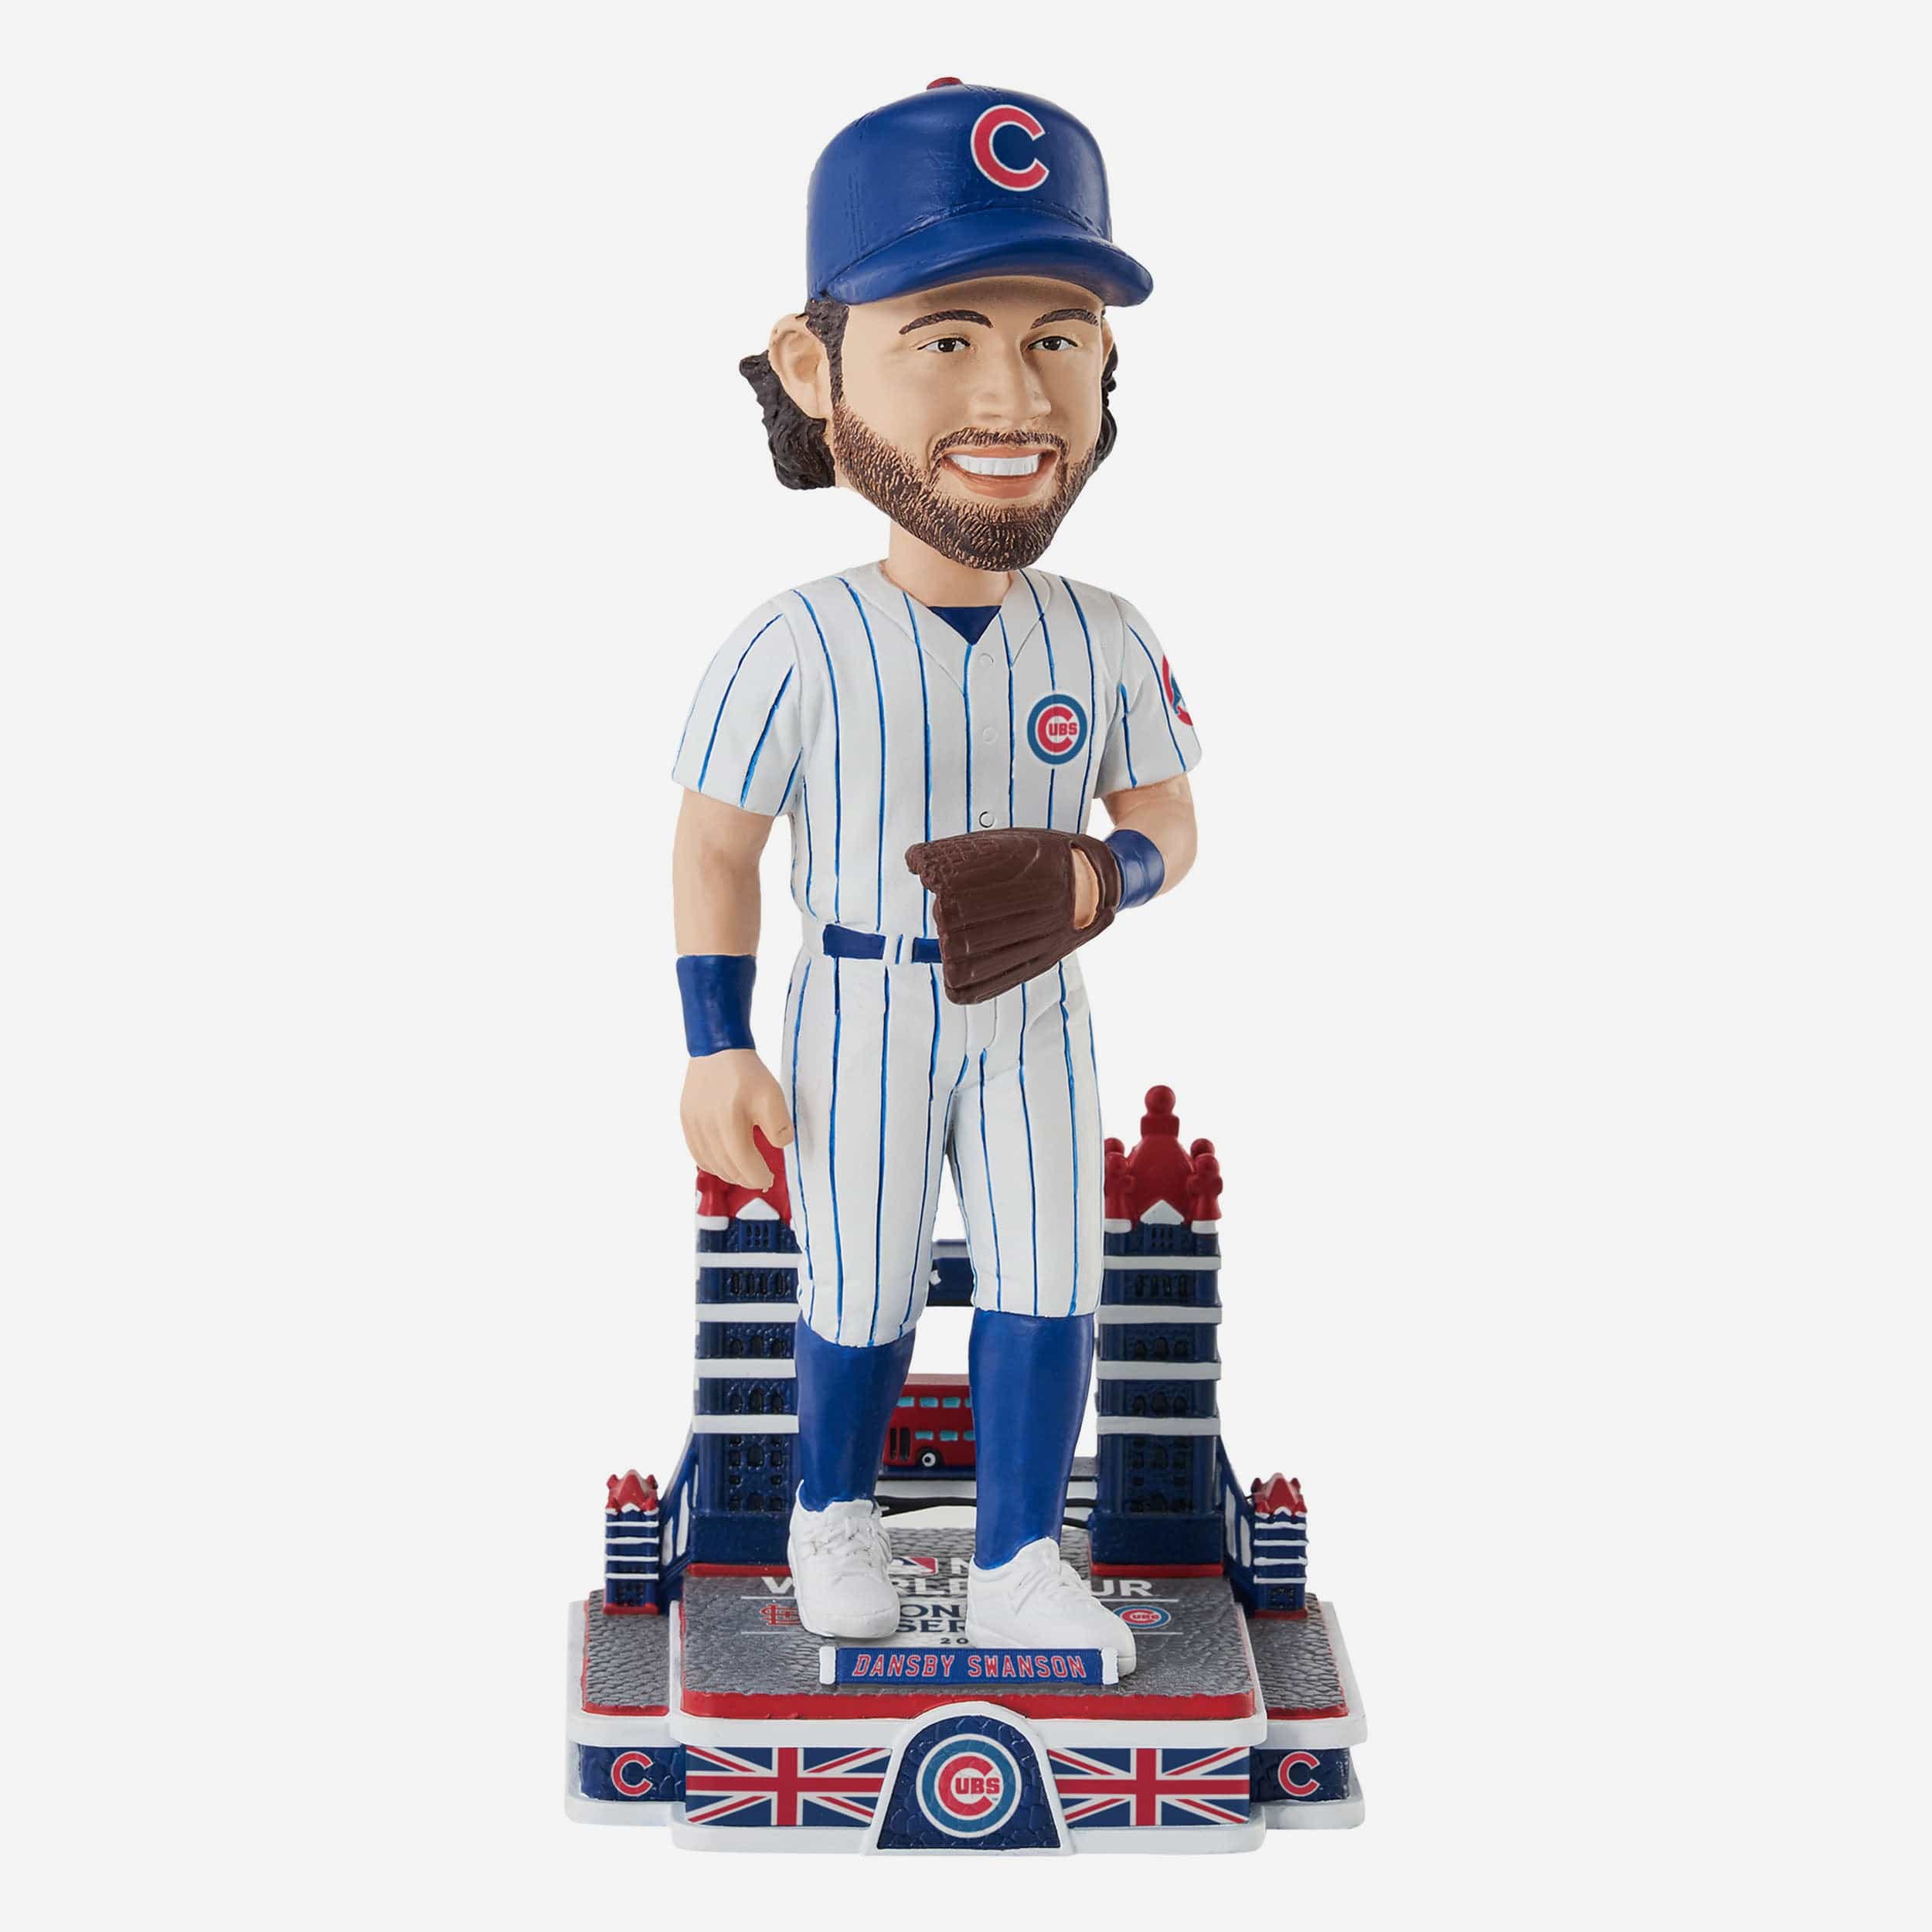 Dansby Swanson Chicago Cubs 2023 MLB London Series Bobblehead Officially Licensed by MLB